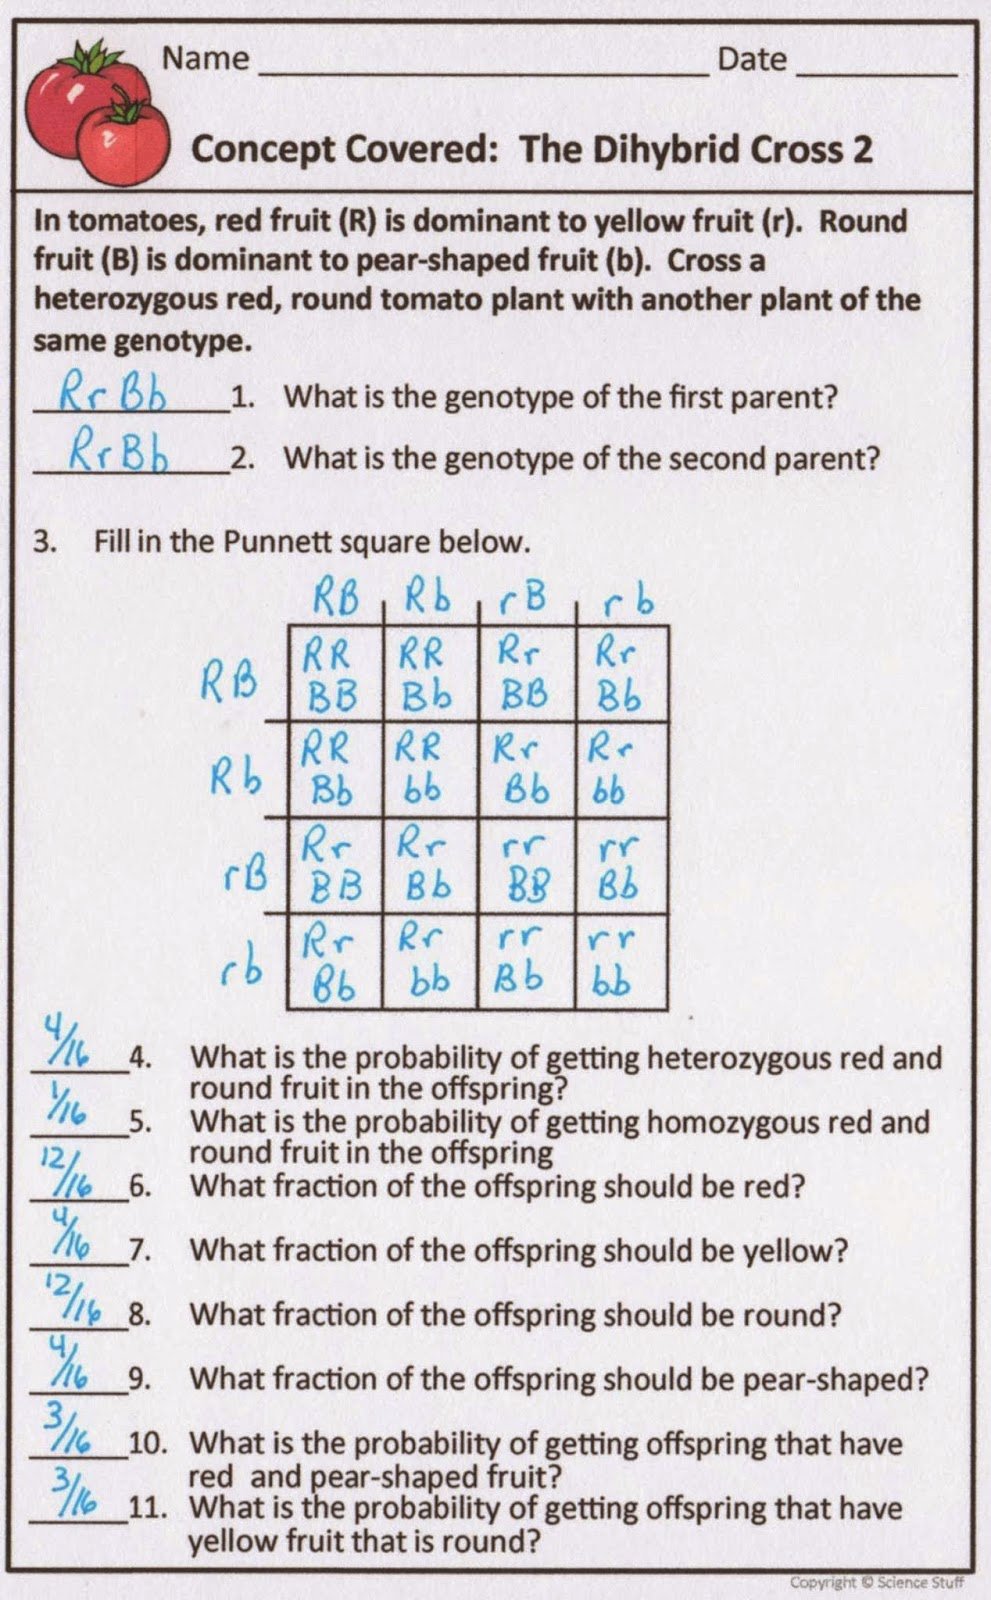 Genetics Problems Worksheet Answers New Amy Brown Science Genetics Problems and Activities for